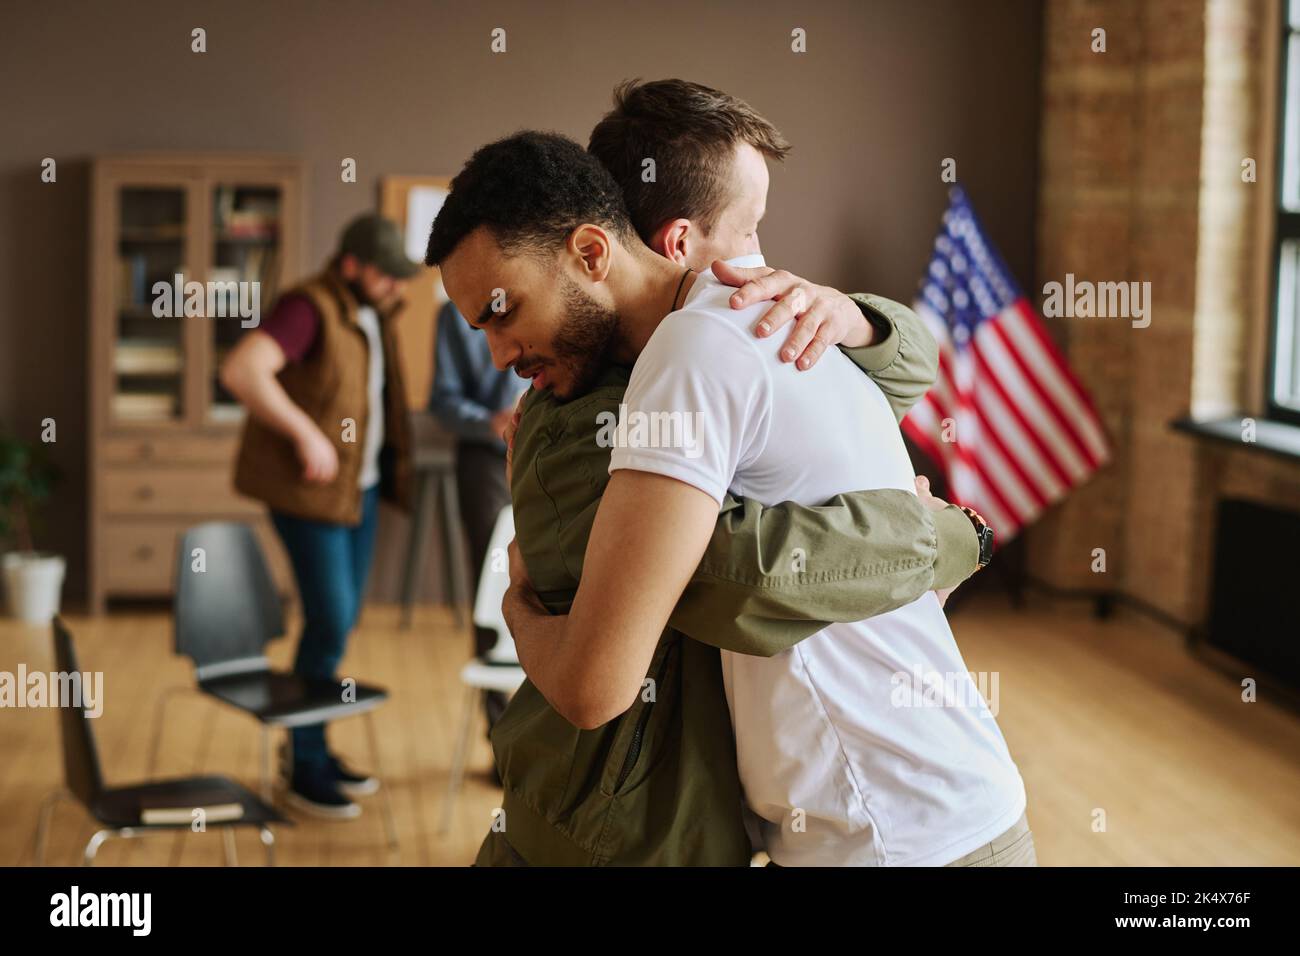 Young man giving hug to his friend with post traumatic syndrome during psychological session after discussing cases of bad life experience Stock Photo